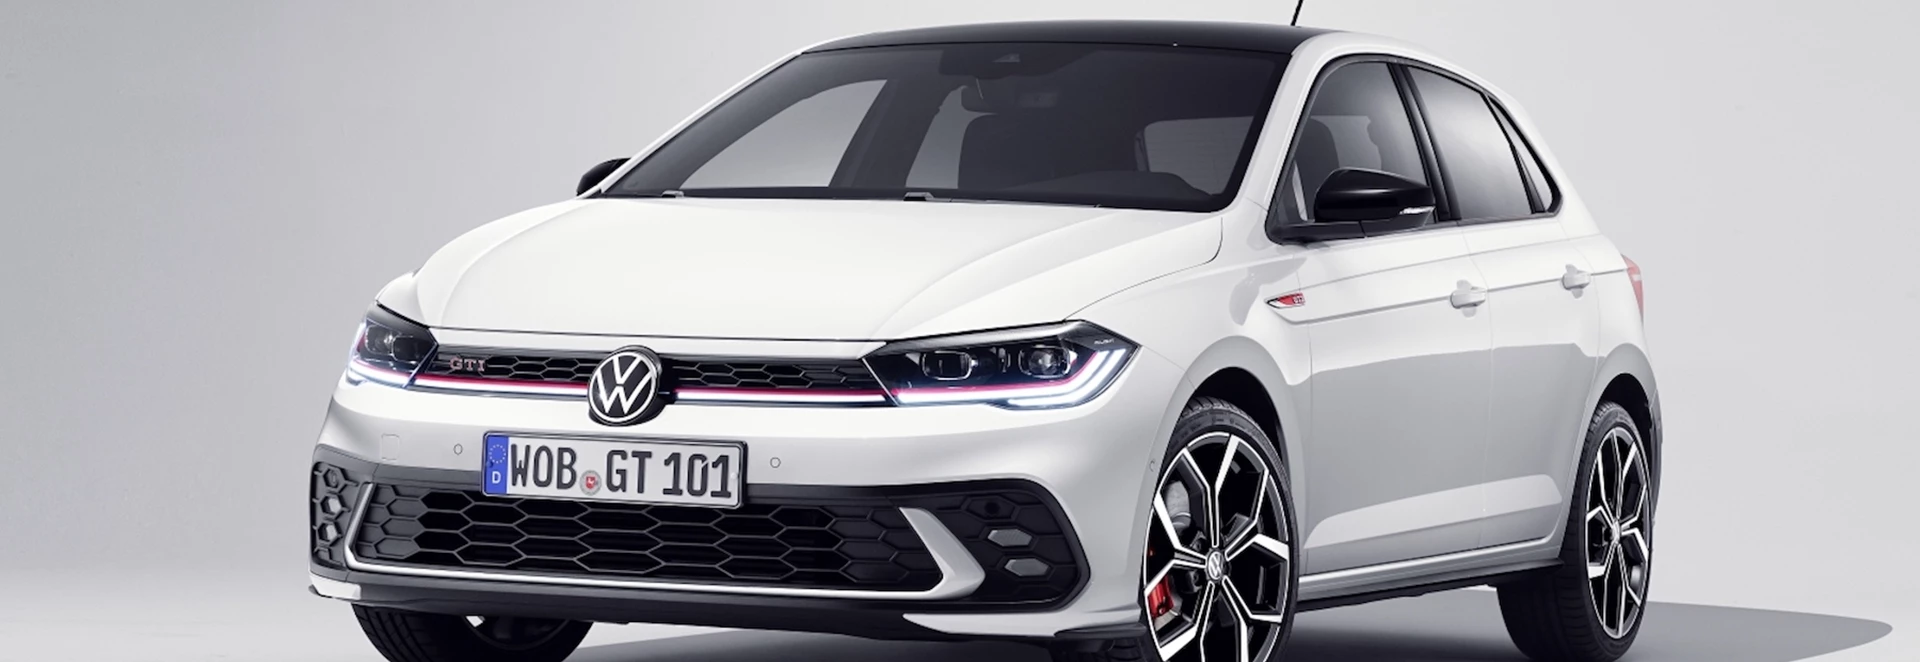 New 204bhp Volkswagen Polo GTI revealed 